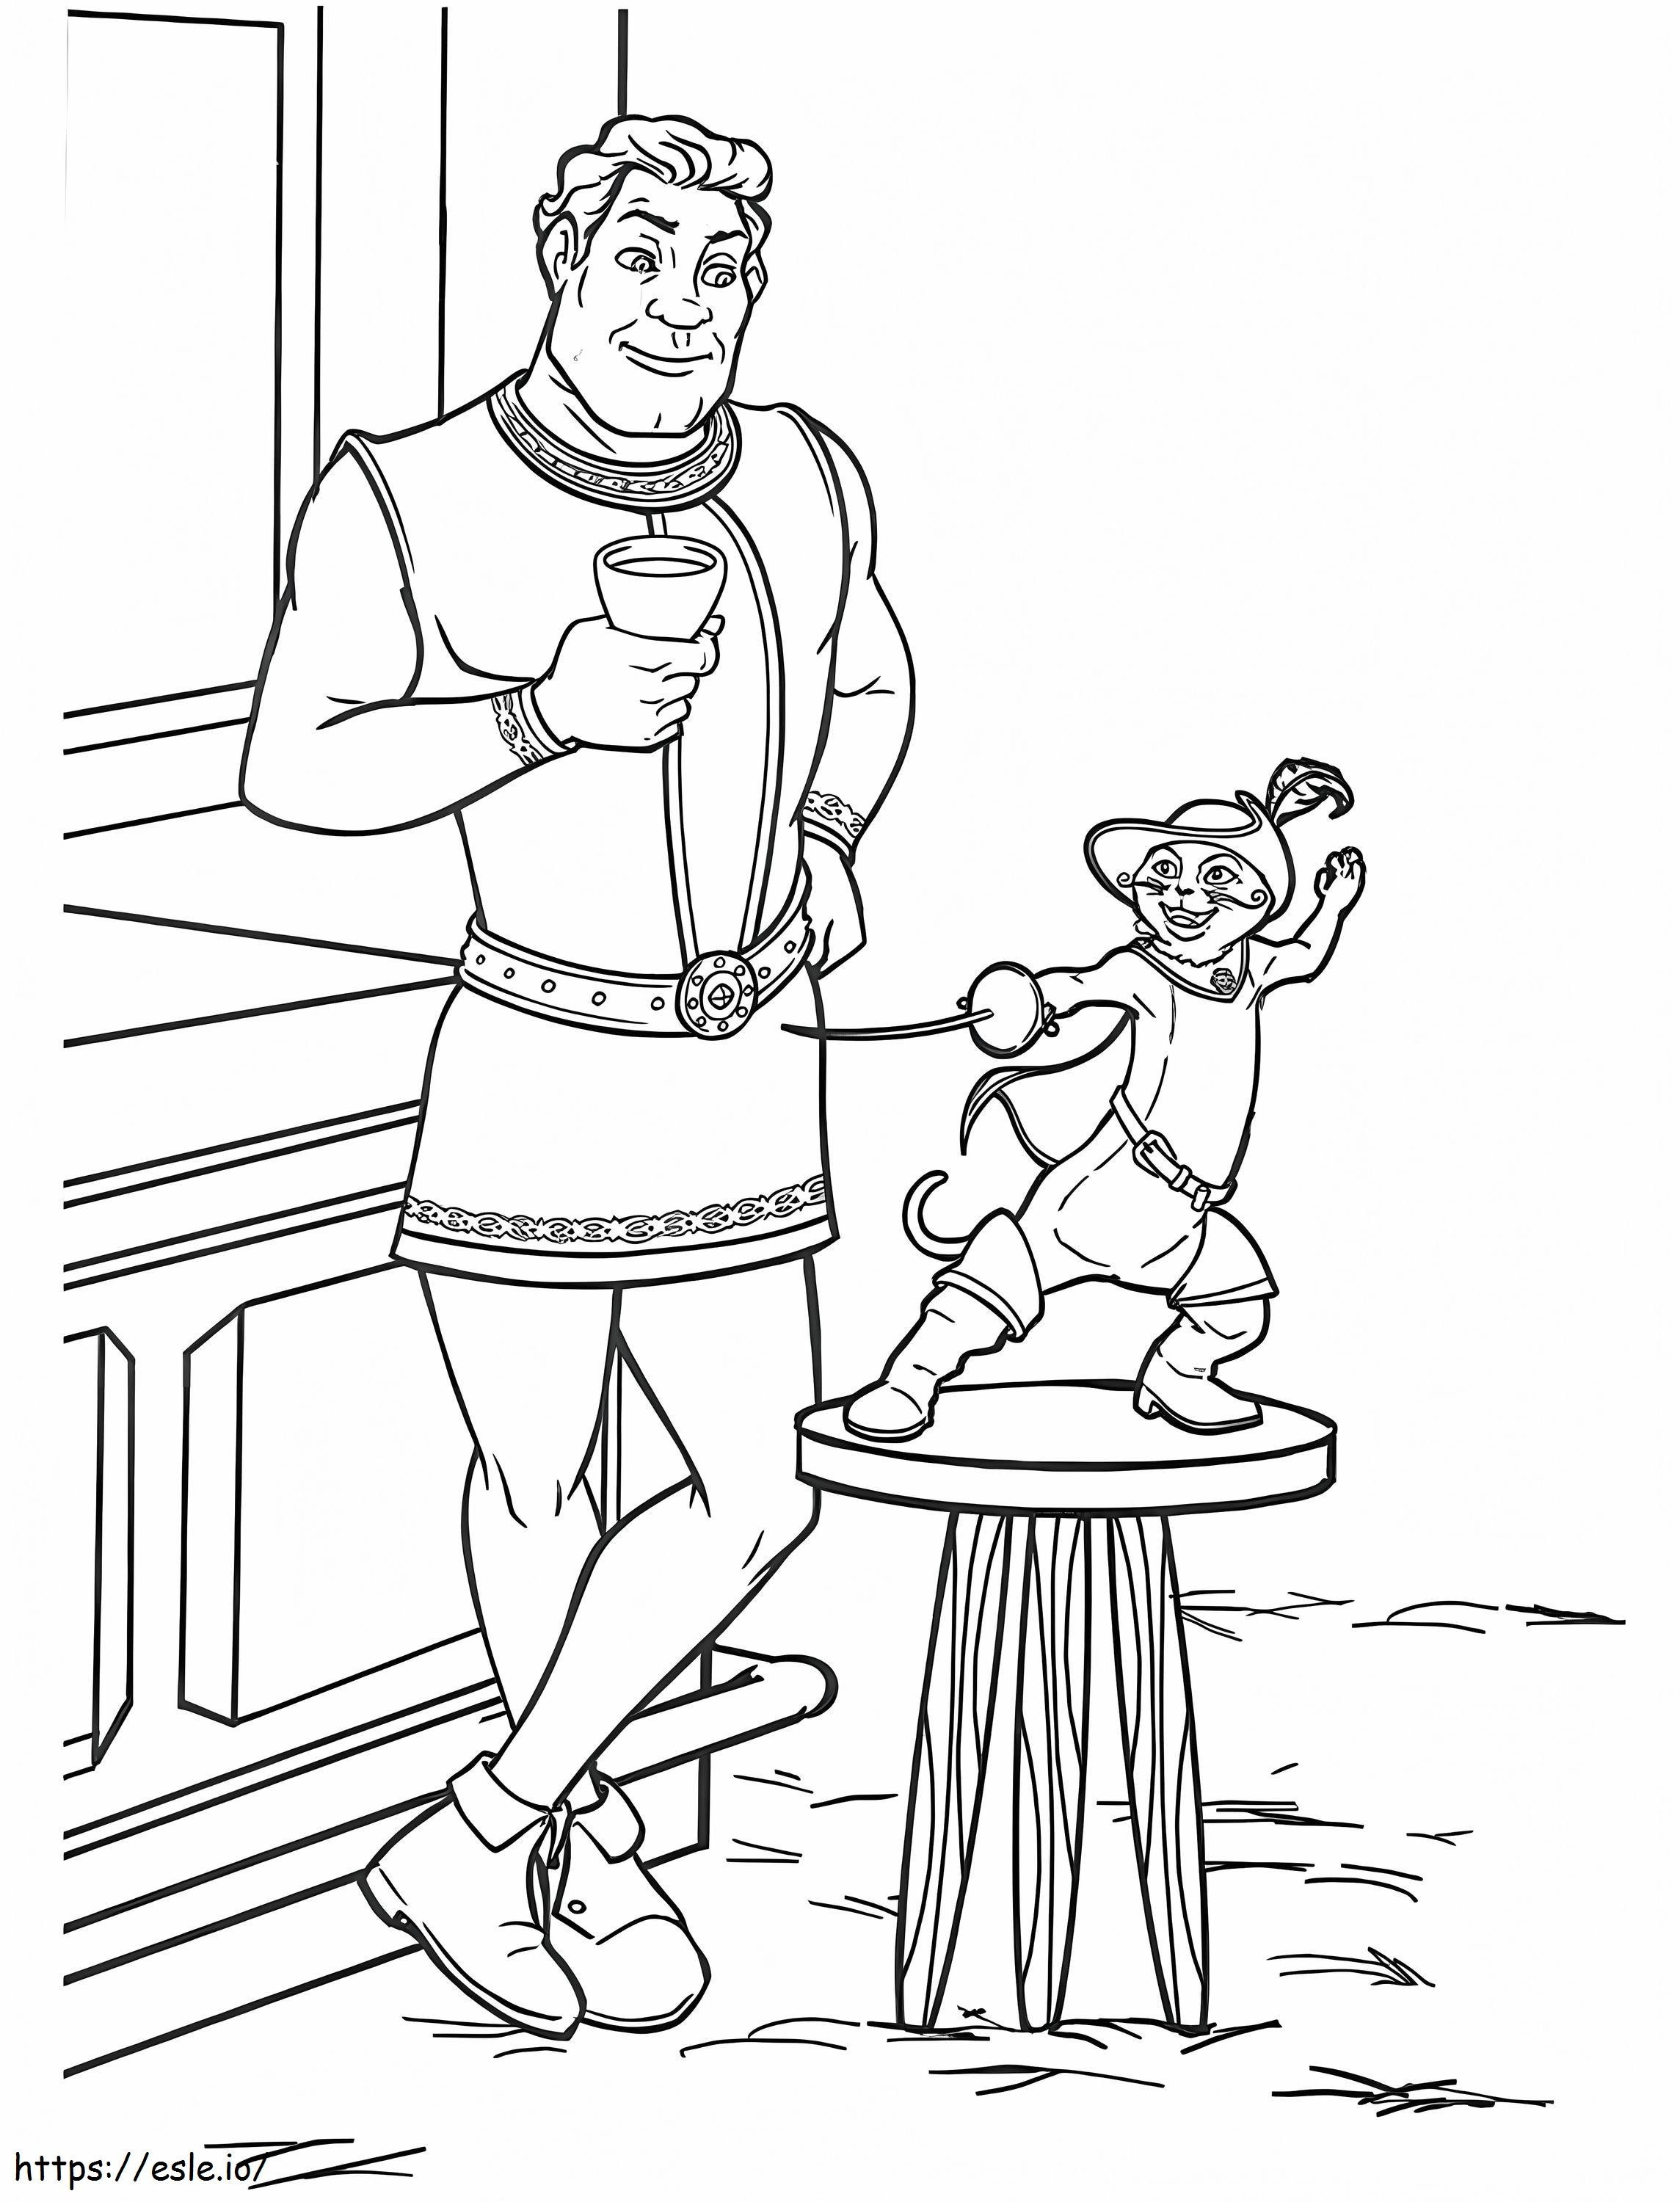 Shrek With Puss In Boots A4 coloring page